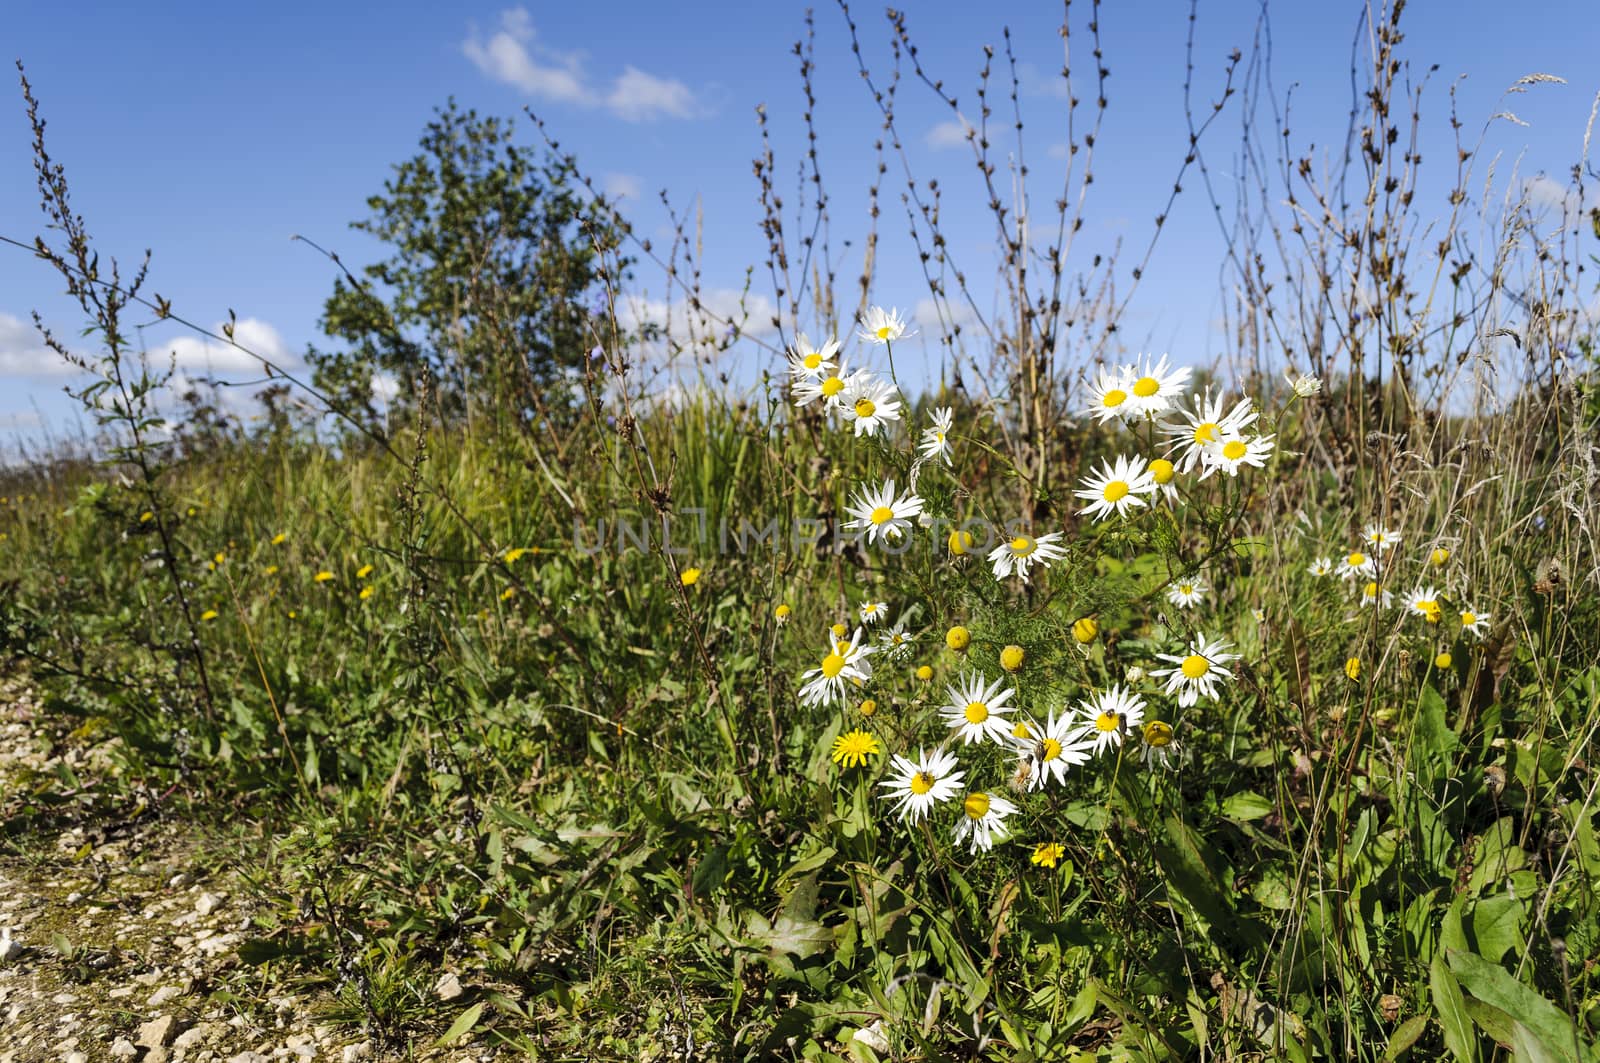 Blooming wild daisies on the roadside of country road